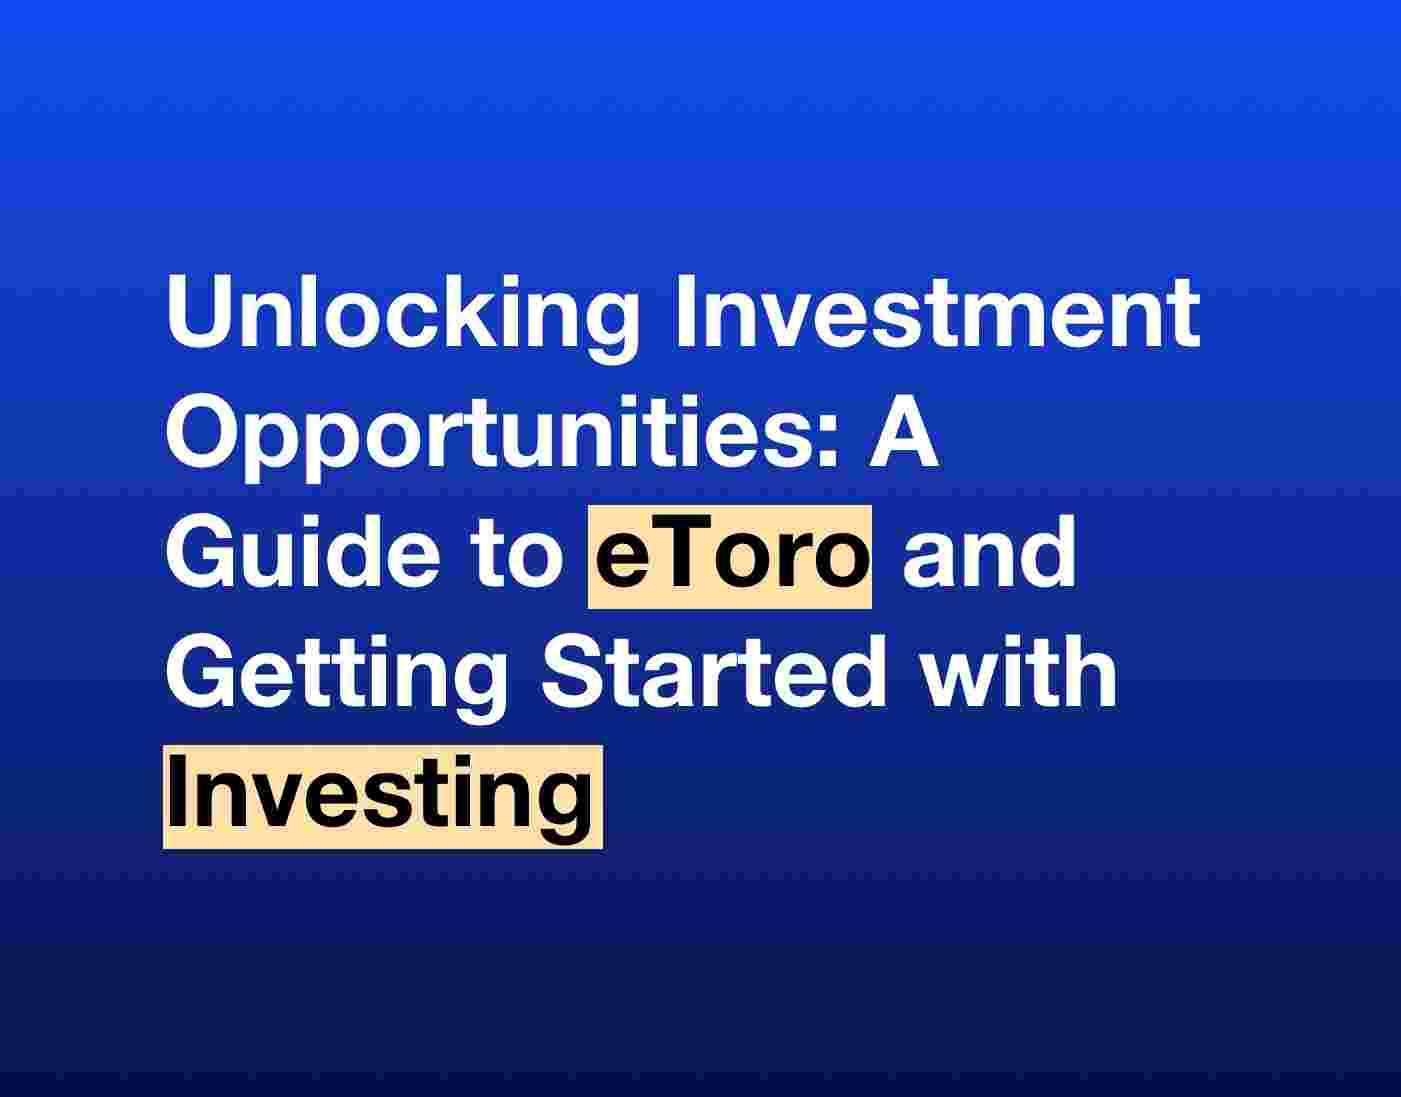 Unlocking Investment Opportunities: A Guide to eToro and Getting Started with Investing